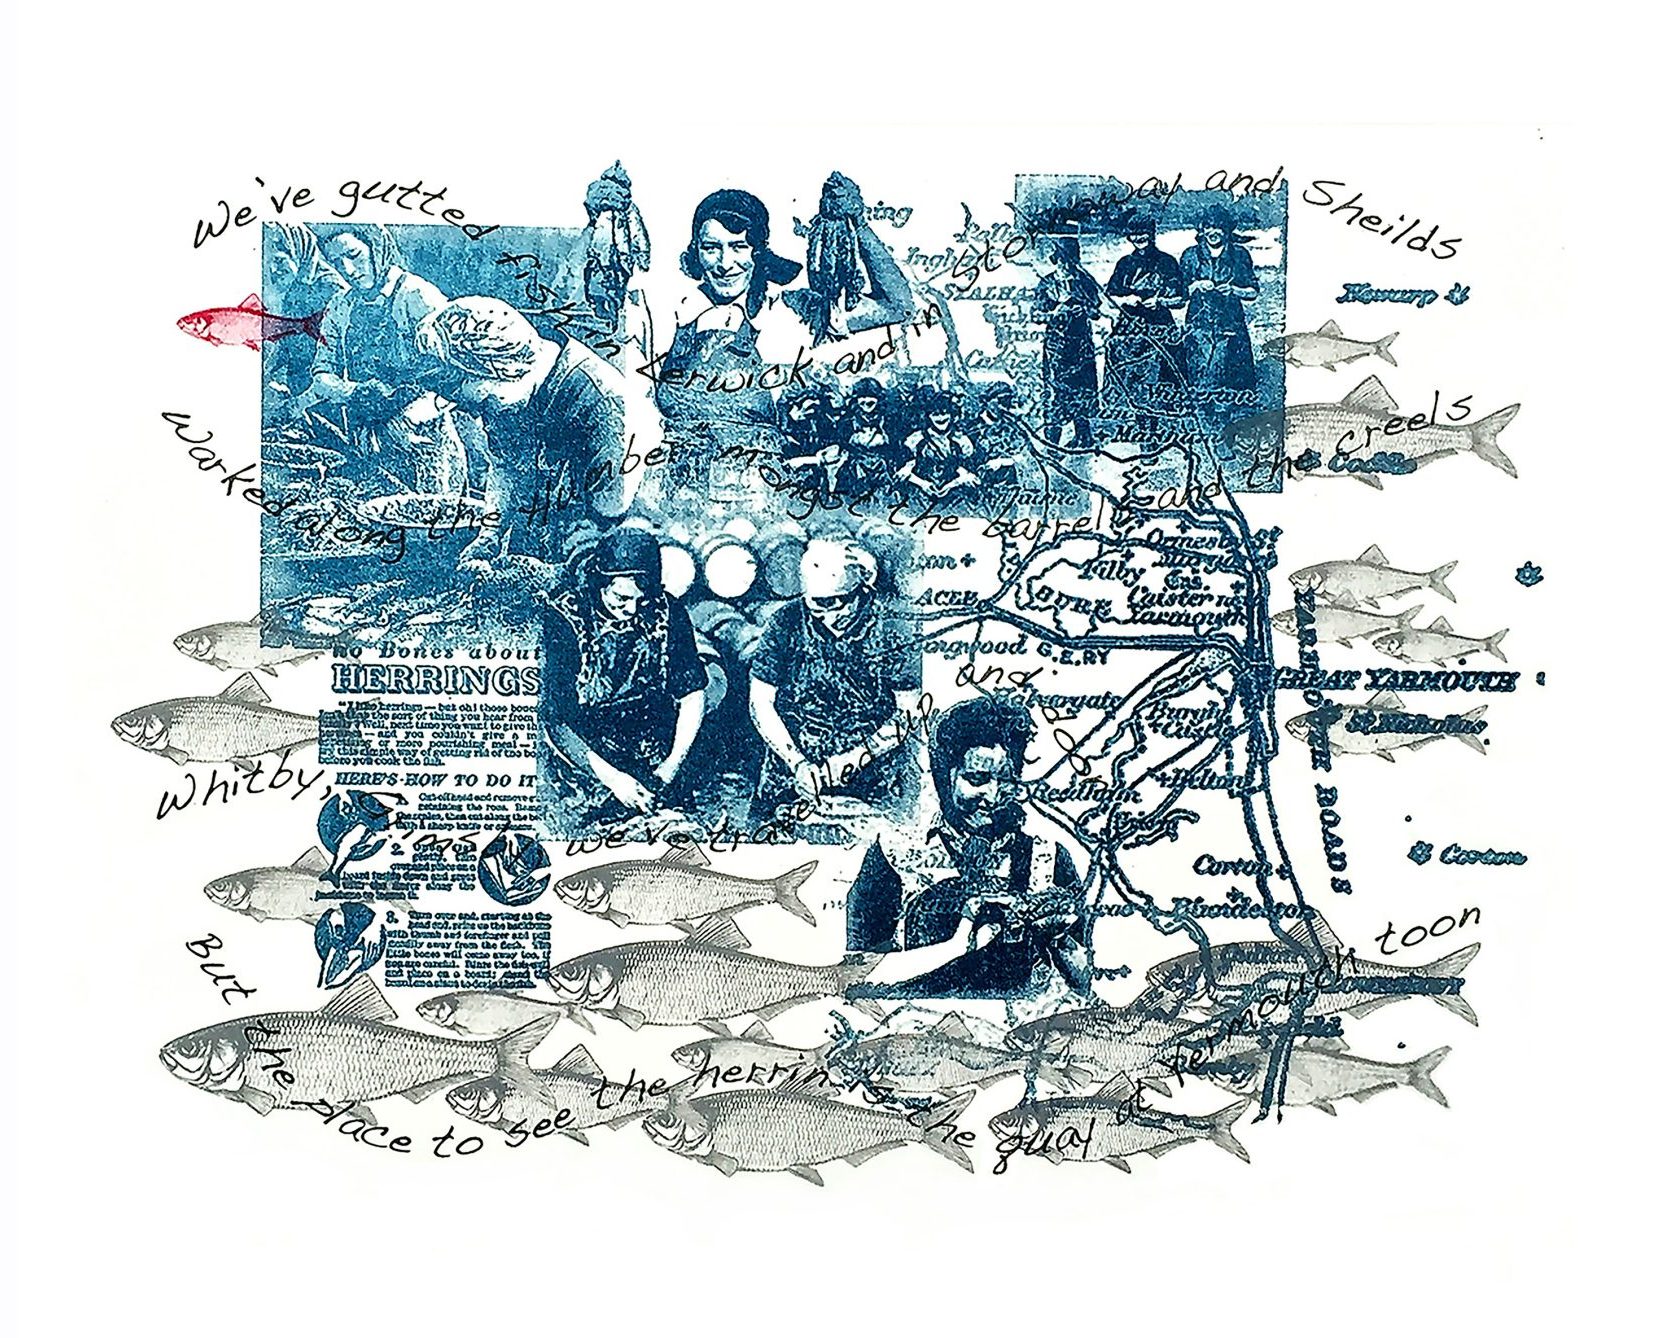 An image of a print design. There are various overlayed images and ephemera on the page. The main colour scheme is blue and the overall art theme is nautical.